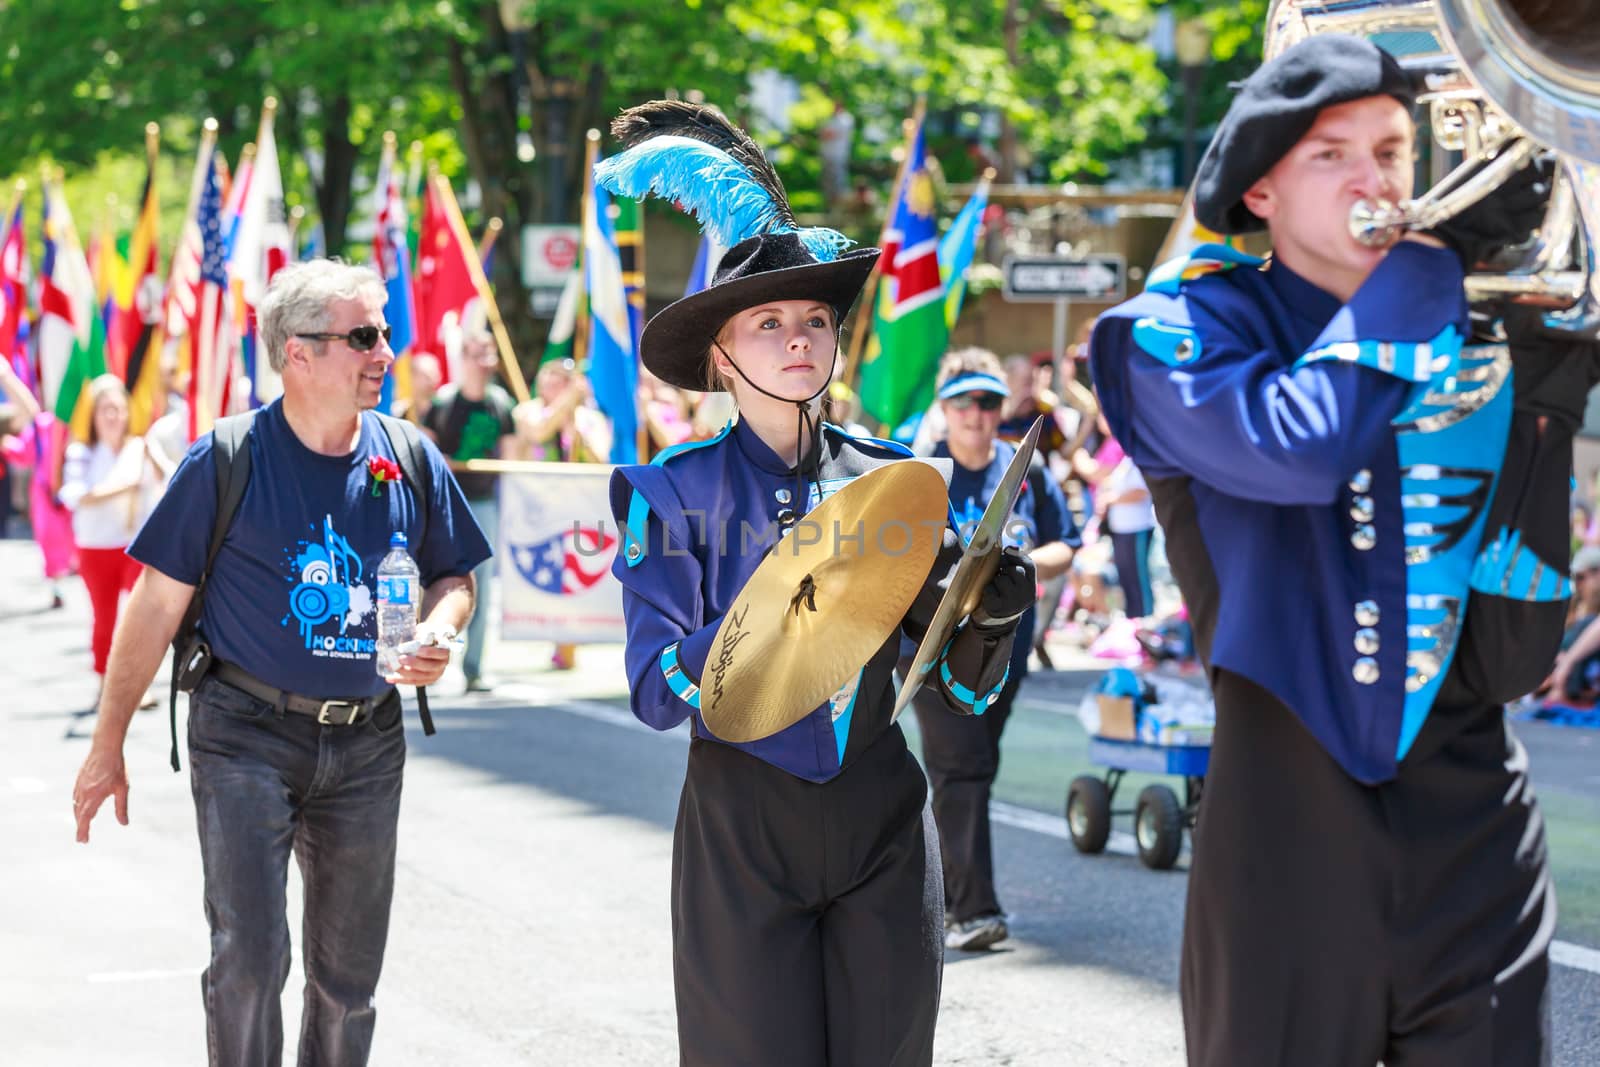 Portland Grand Floral Parade 2014 by pngstudio